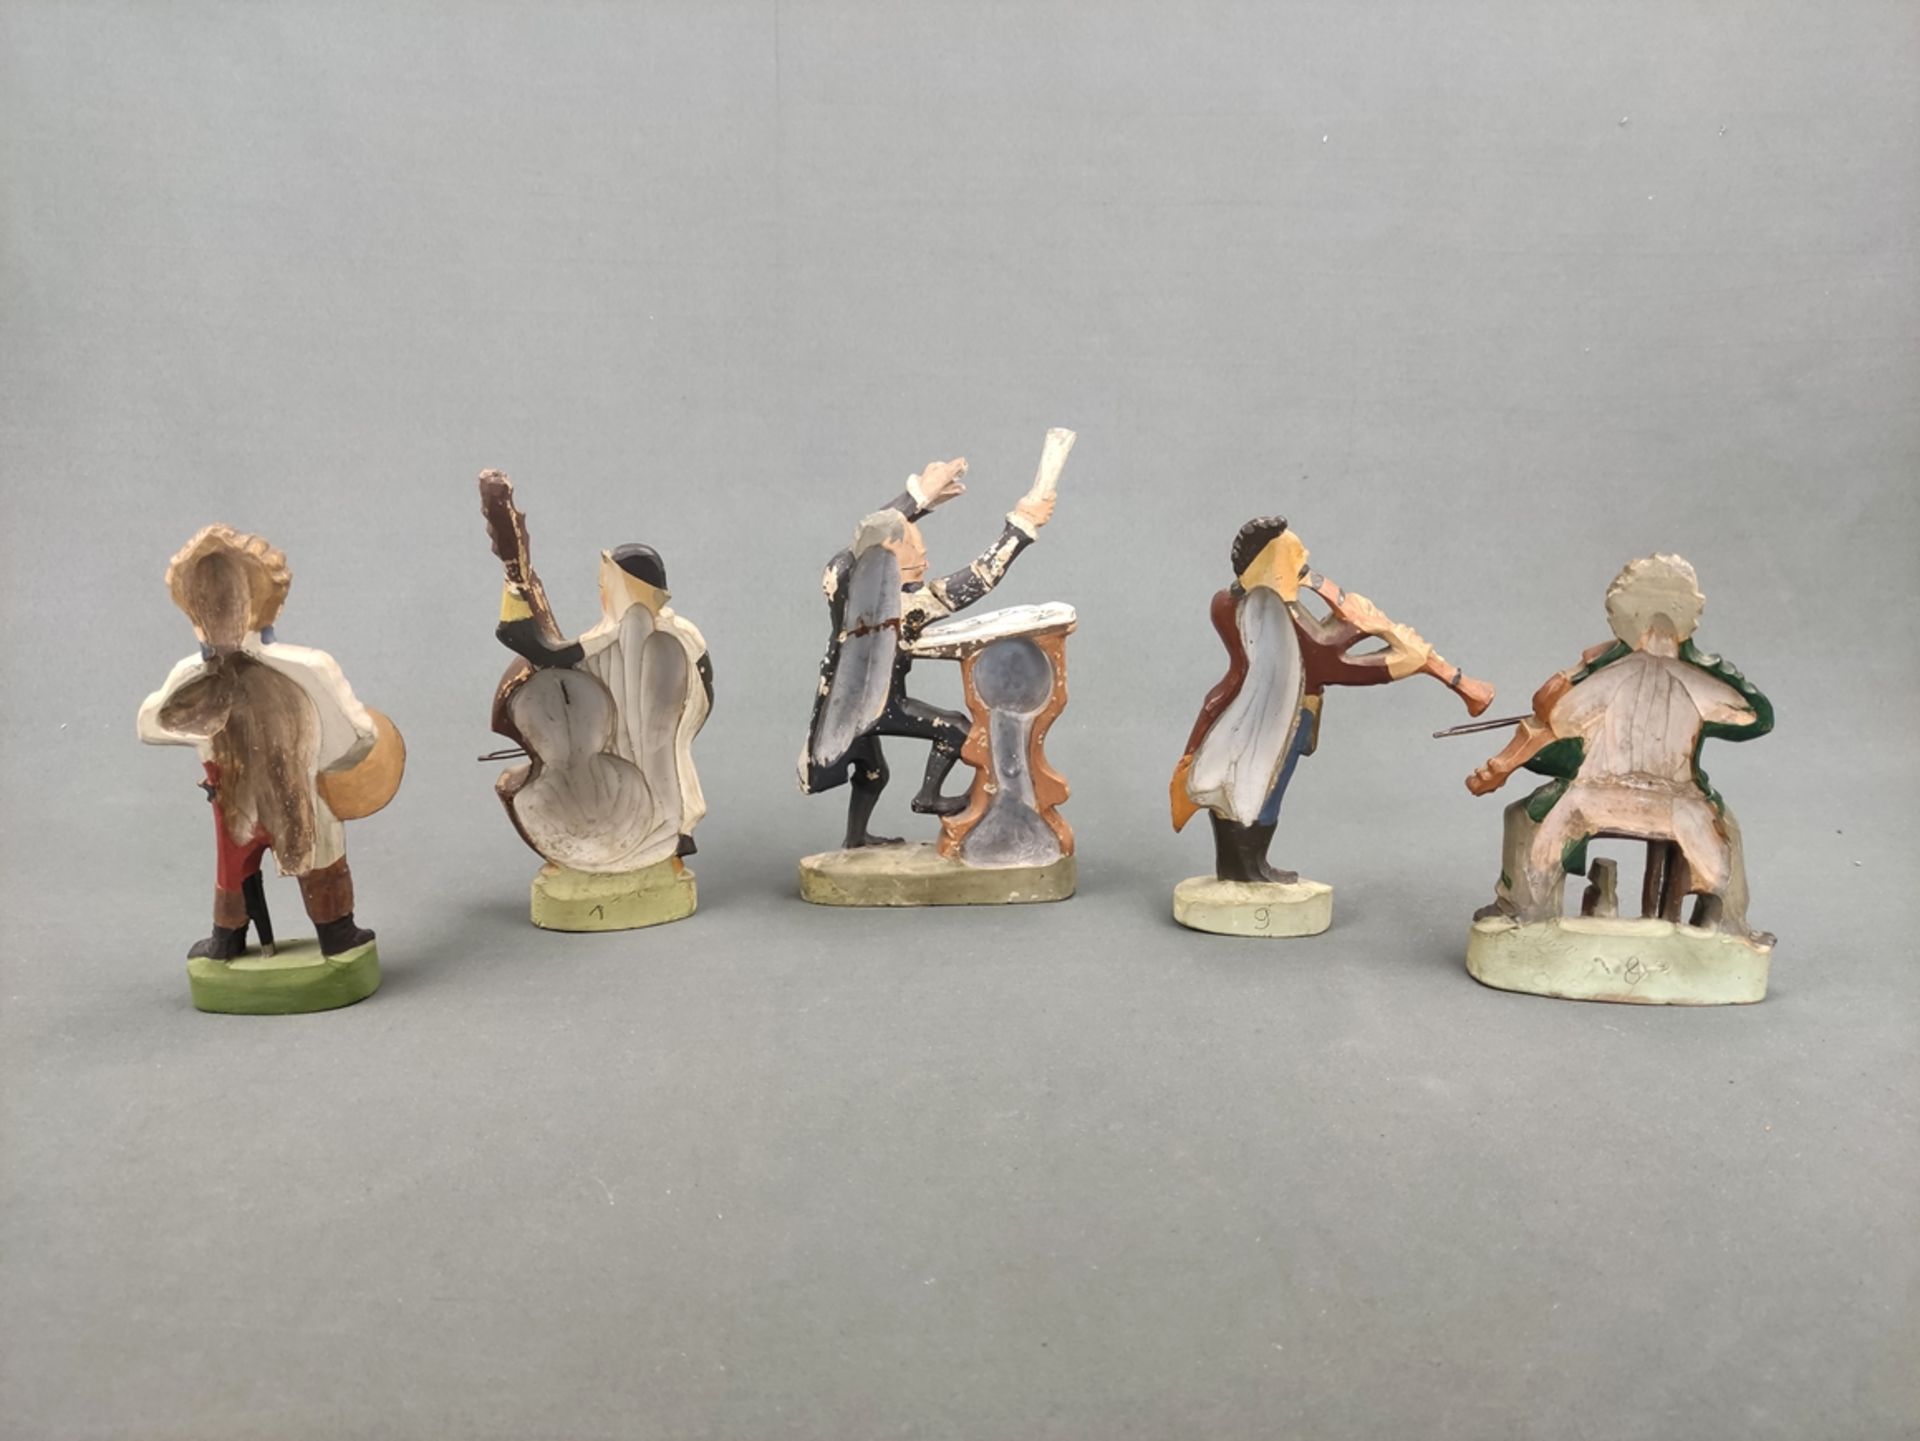 Zizenhauser musicians with music director, 5 figurines, terracotta, colourfully painted, moulding A - Image 2 of 3